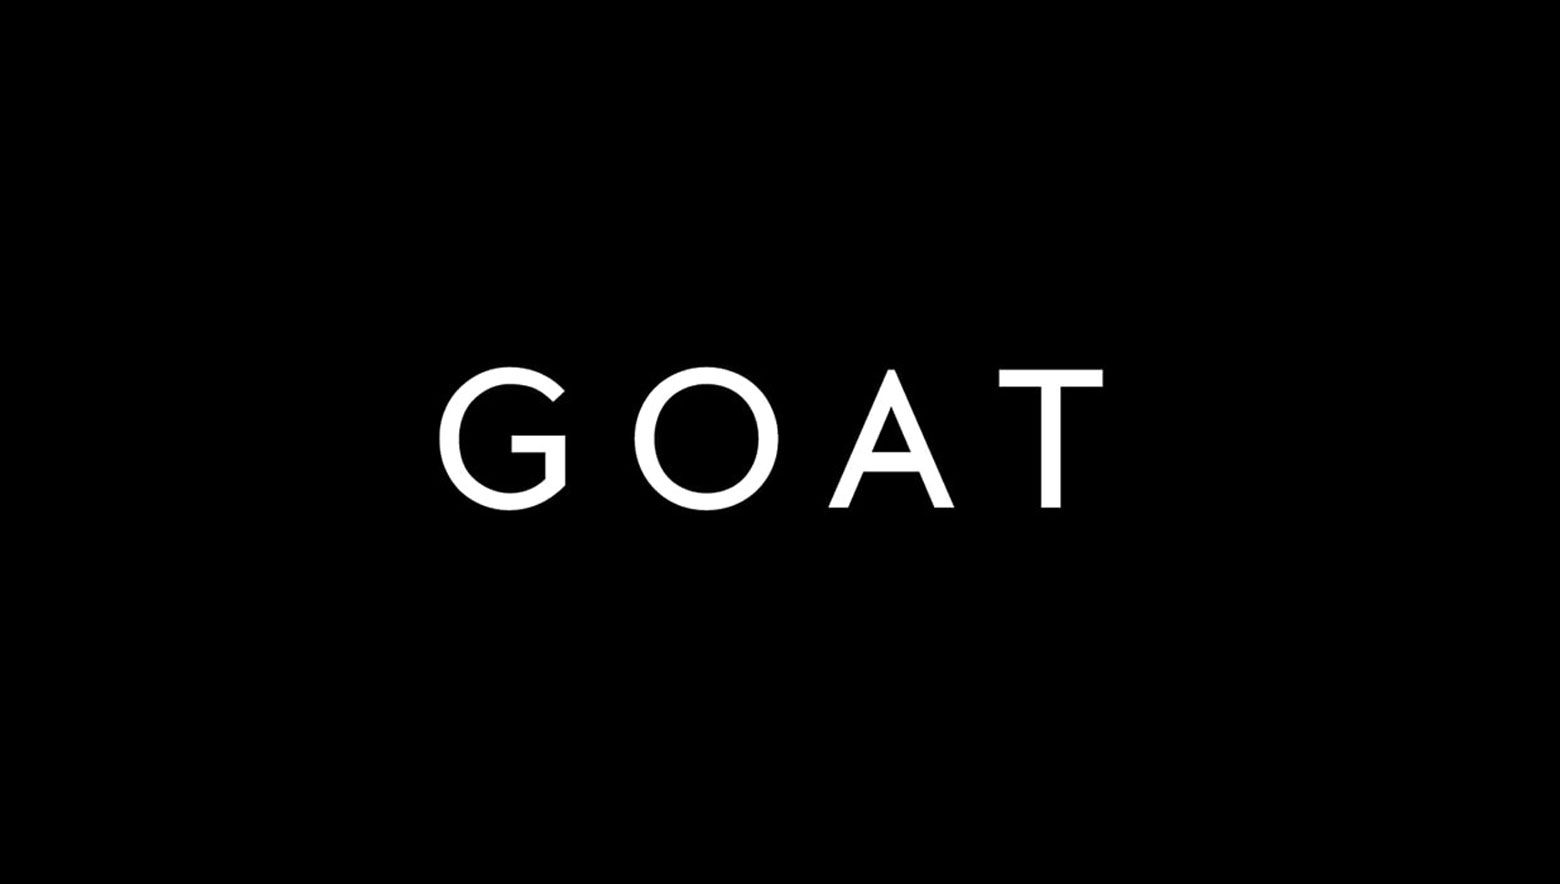 GOAT logo in captial letters and in white.